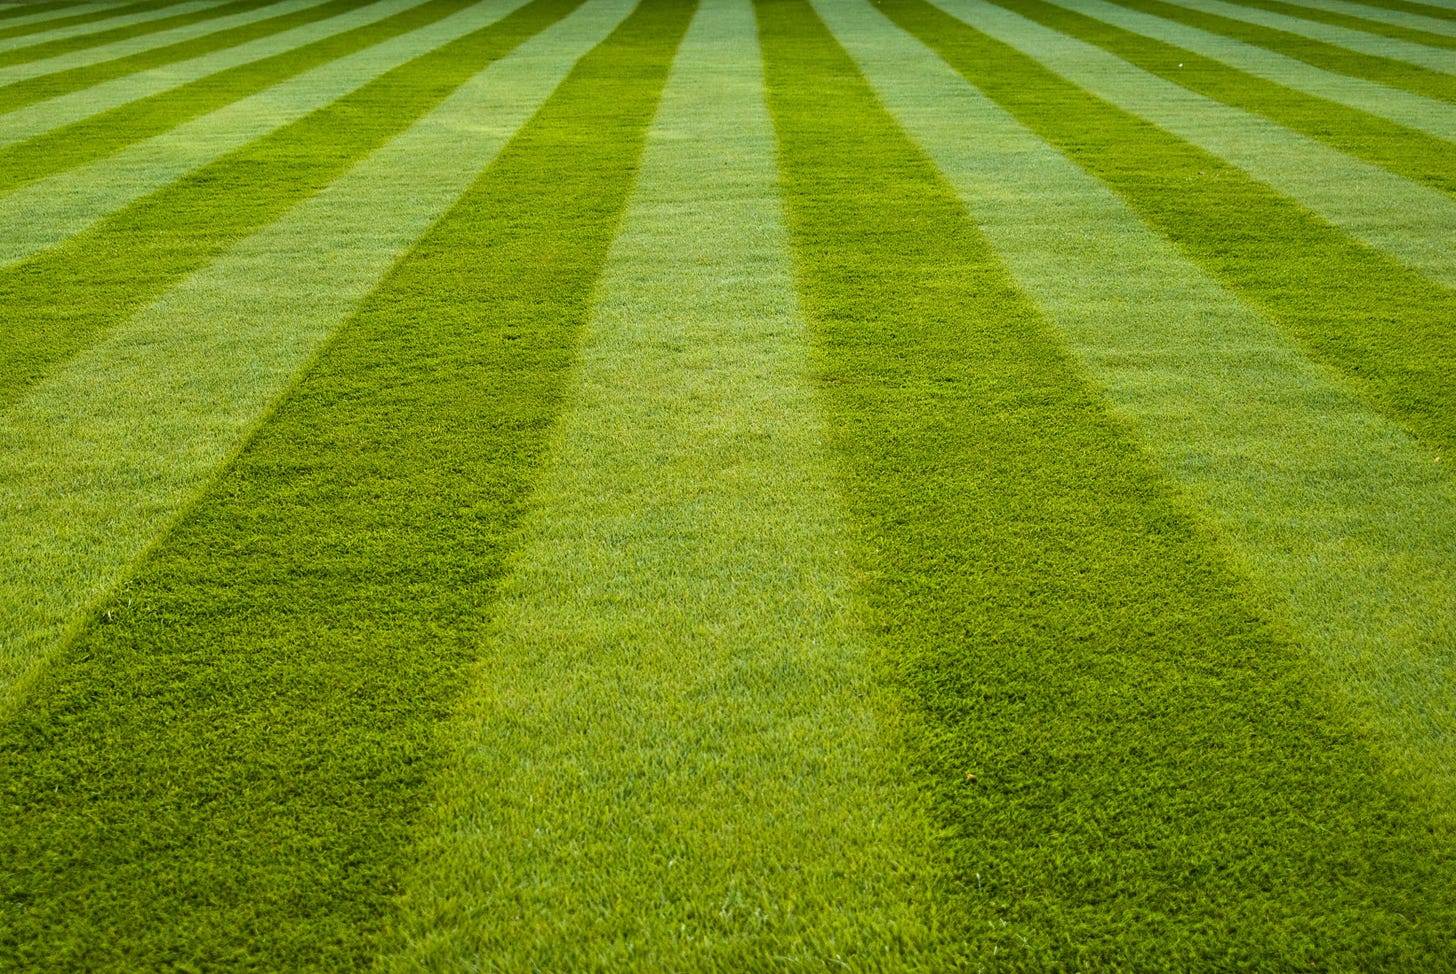 Lawn Growing & Maintenance Online Course | Learning with Experts